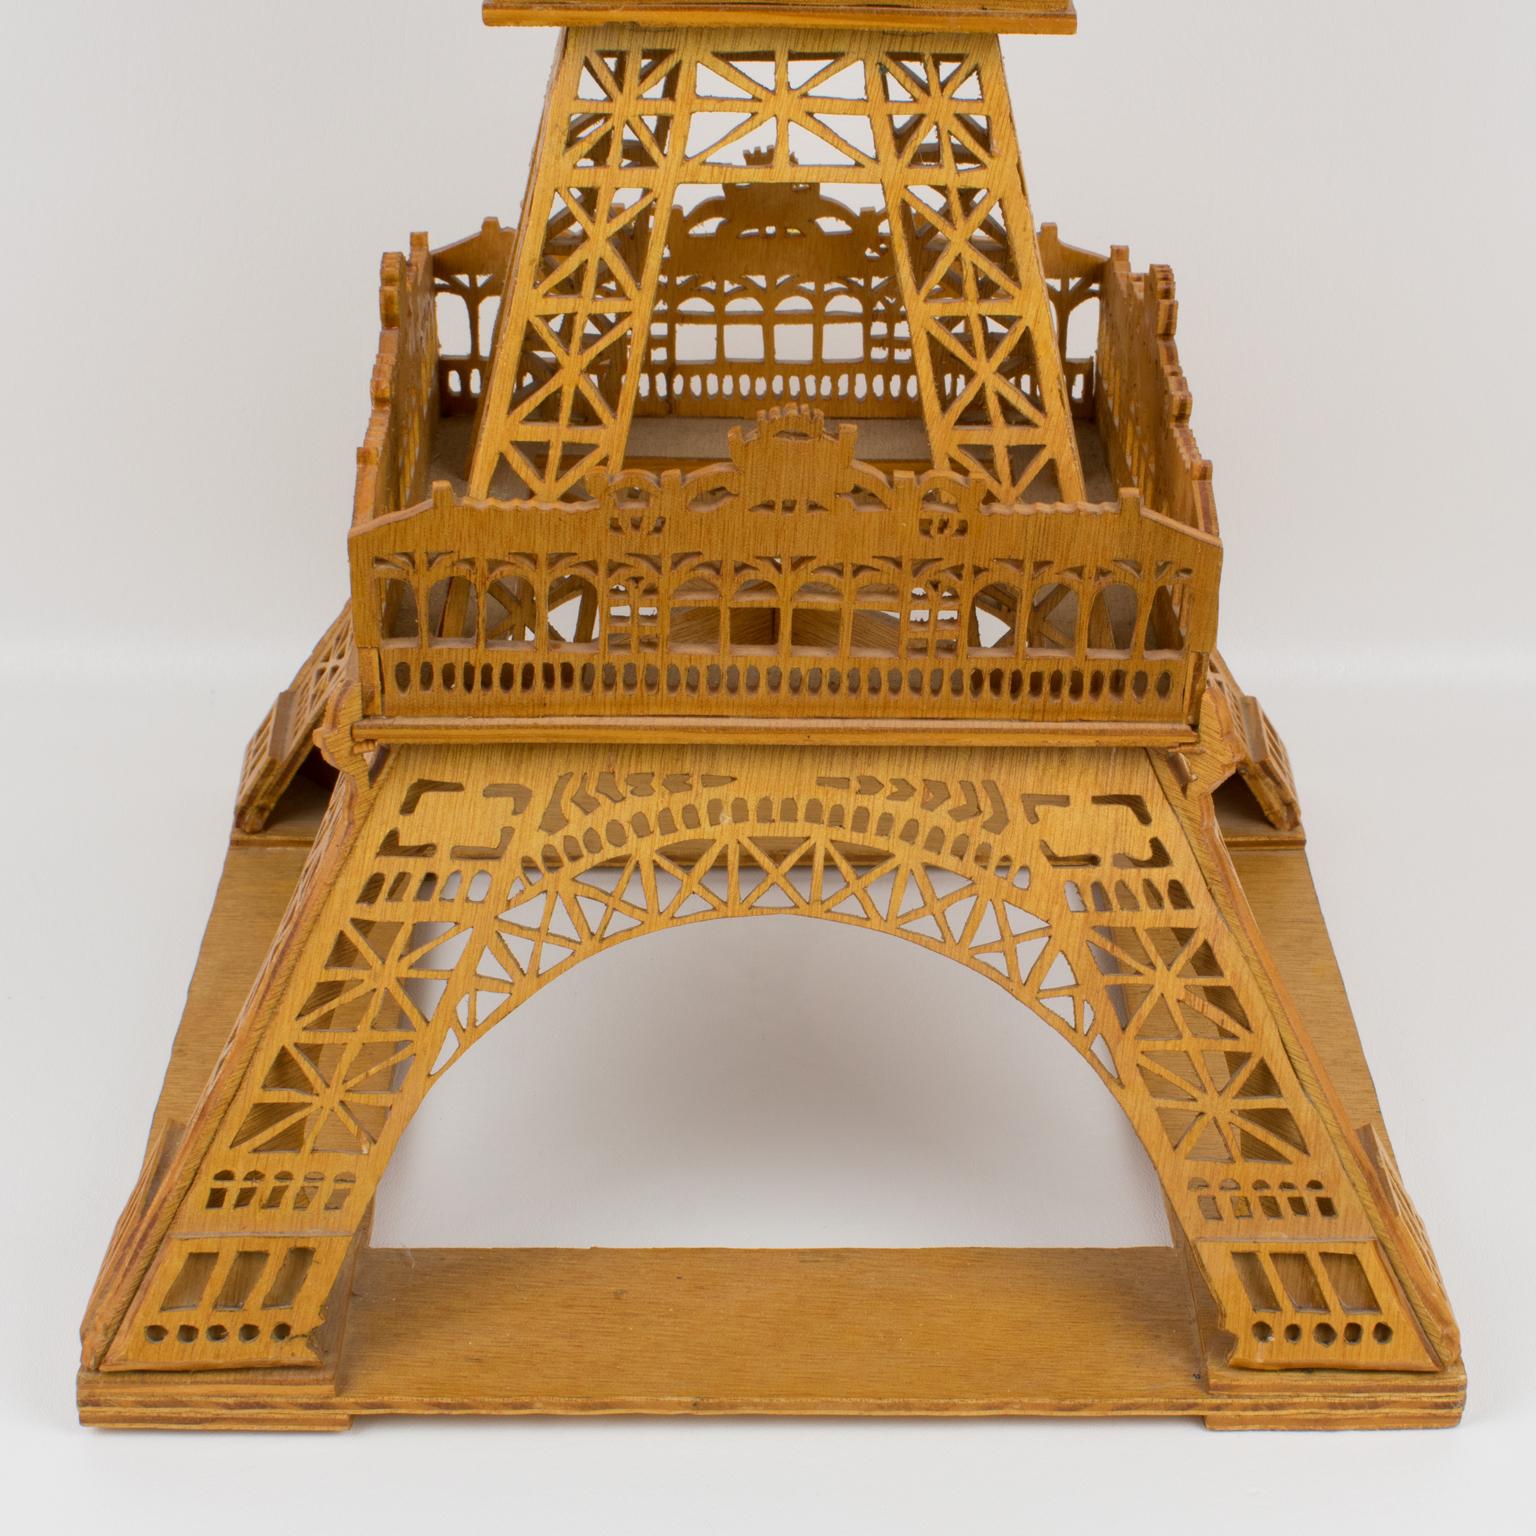 French Hand-Carved Wooden Eiffel Tower Model Miniature Sculpture 6